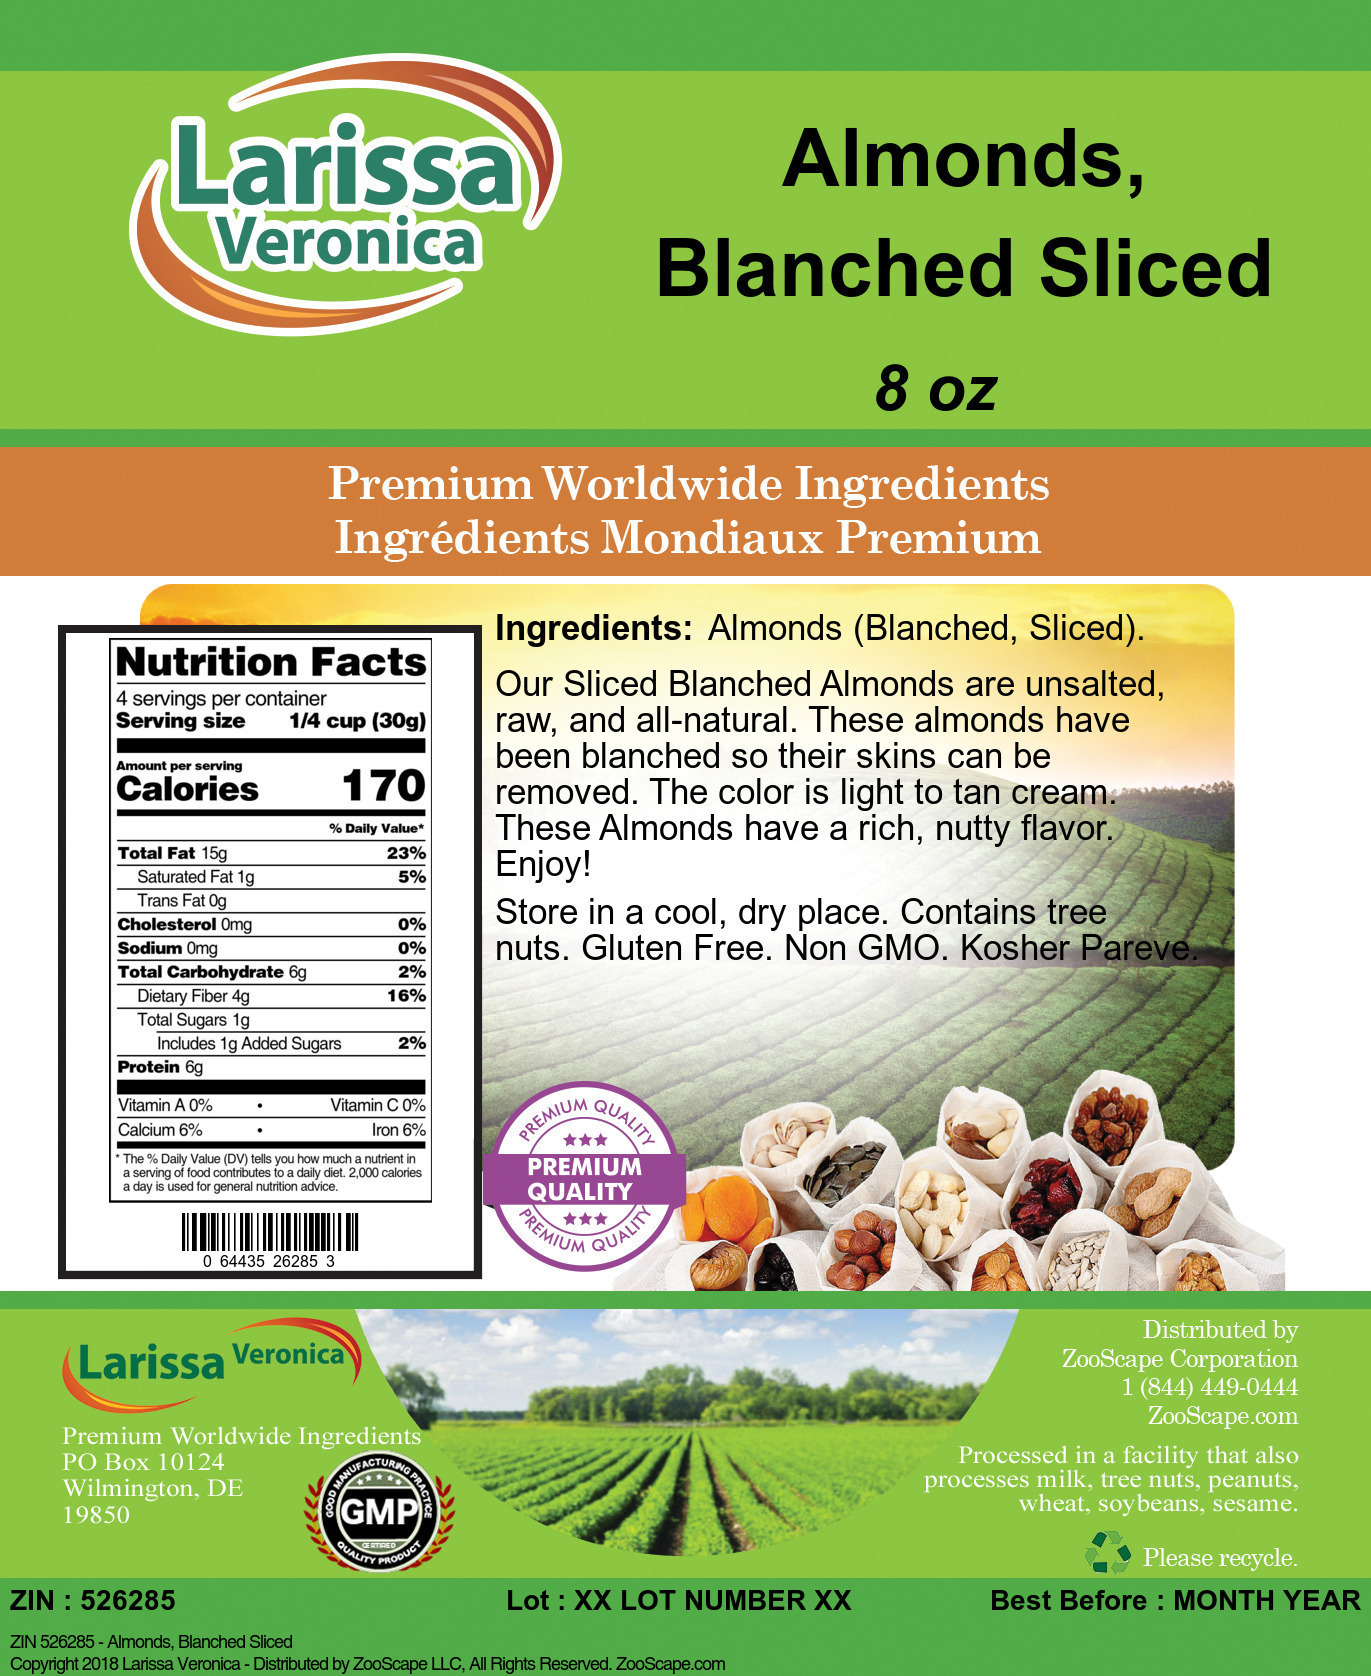 Almonds, Blanched Sliced - Label